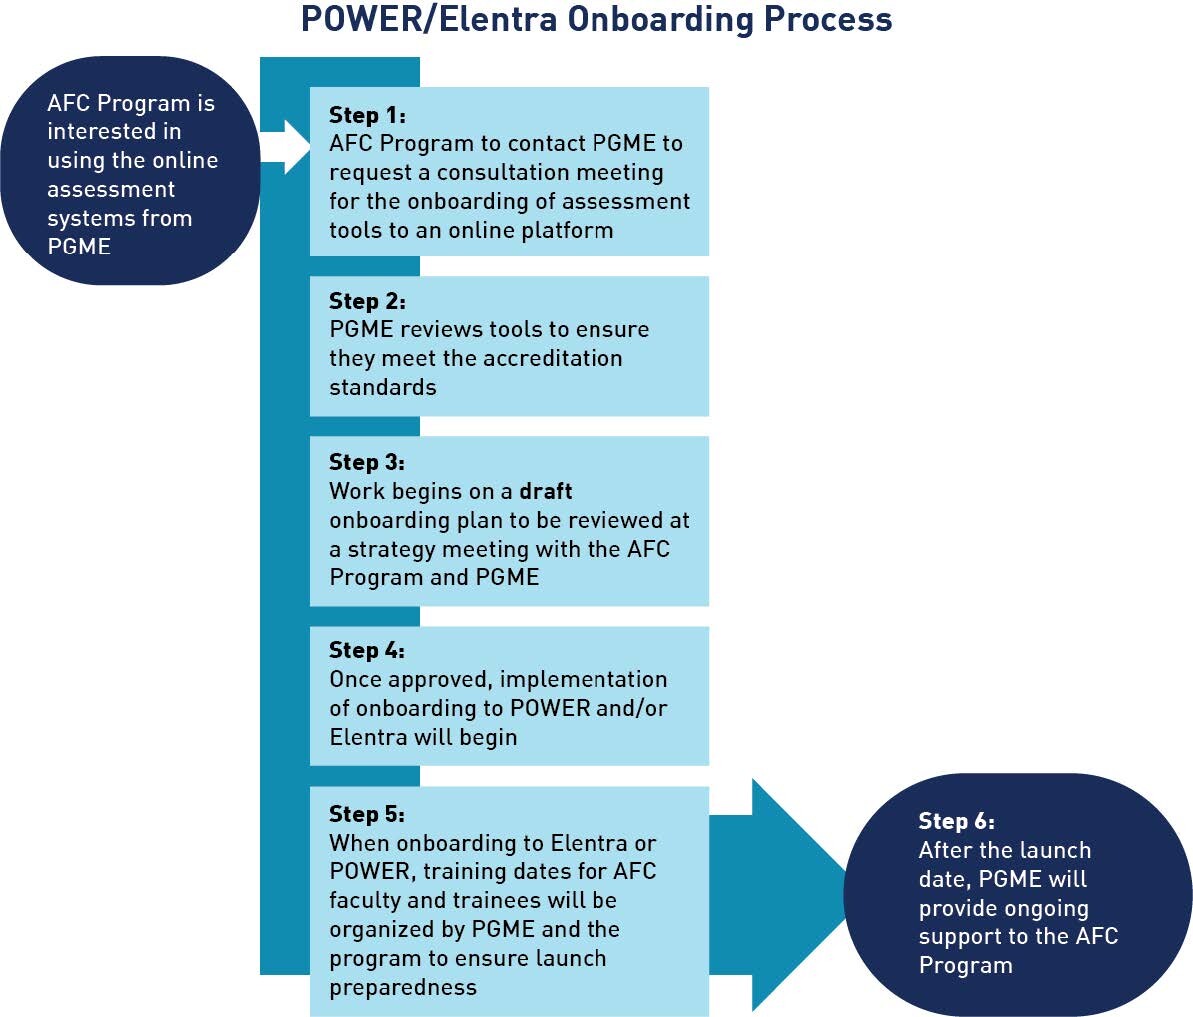 Flow chart for power/elentra onboarding process